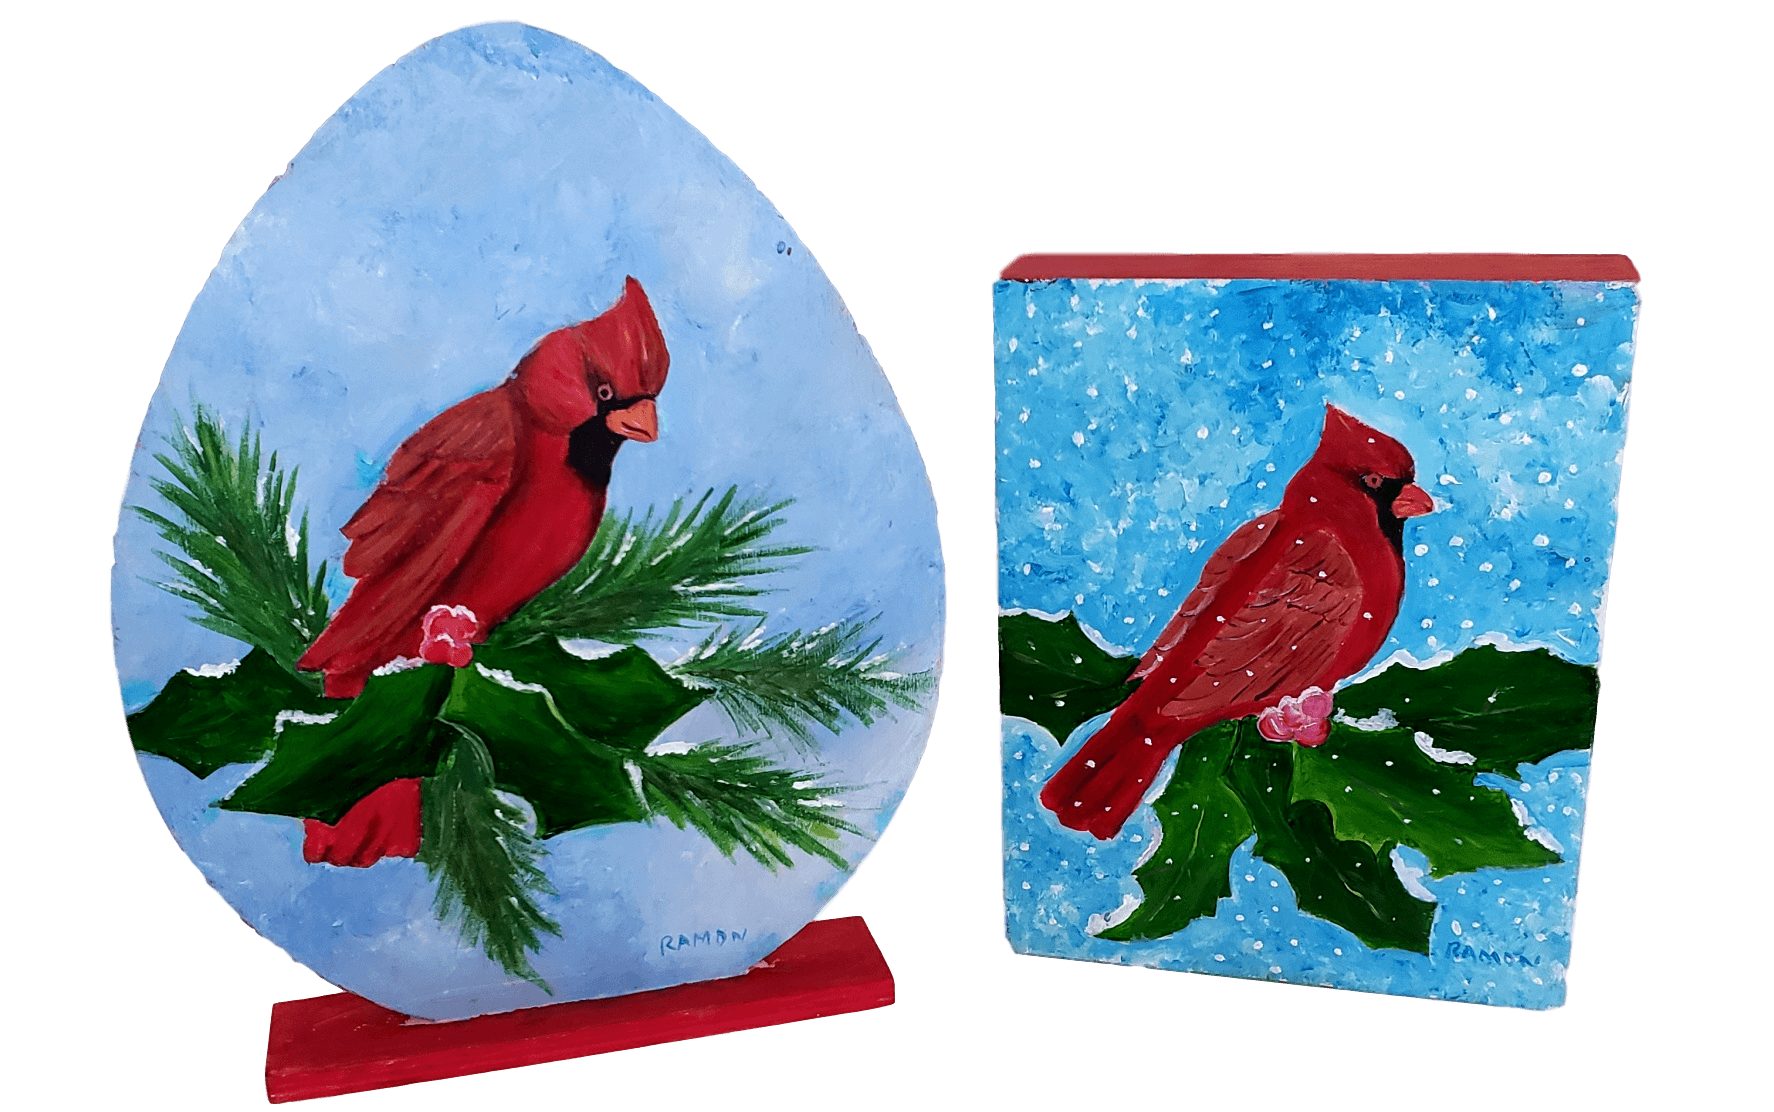 Tabletop Art Wood Holiday Cardinal Images Handpainted By Local Artist Ramon - Ysleta Mission Gift Shop- VOTED 2022 El Paso's Best Gift Shop